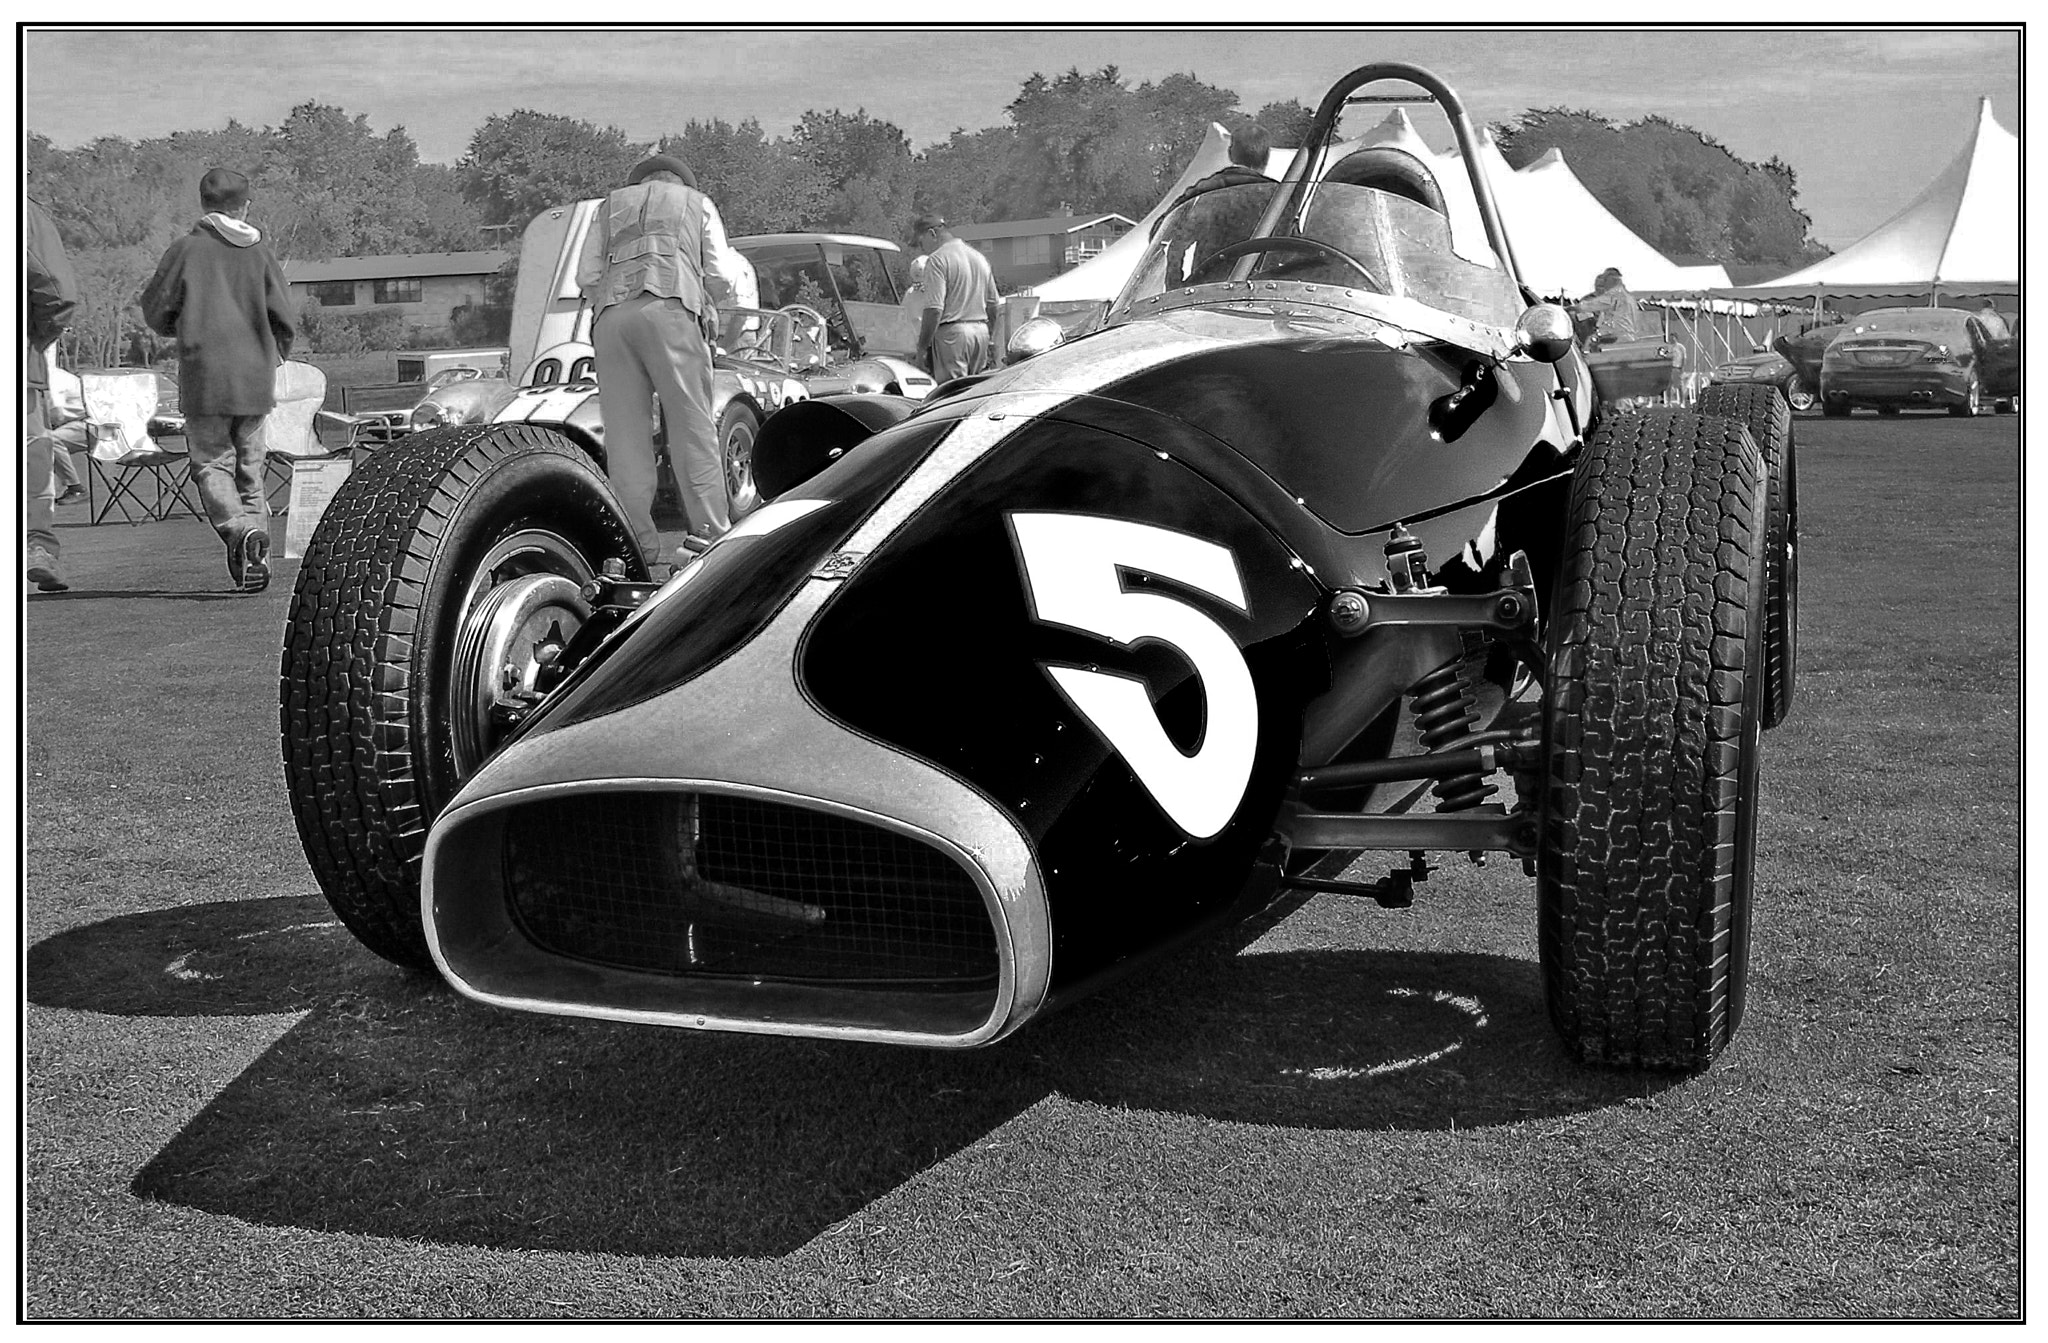 Olympus SP320 sample photo. 1960s indy racer photography